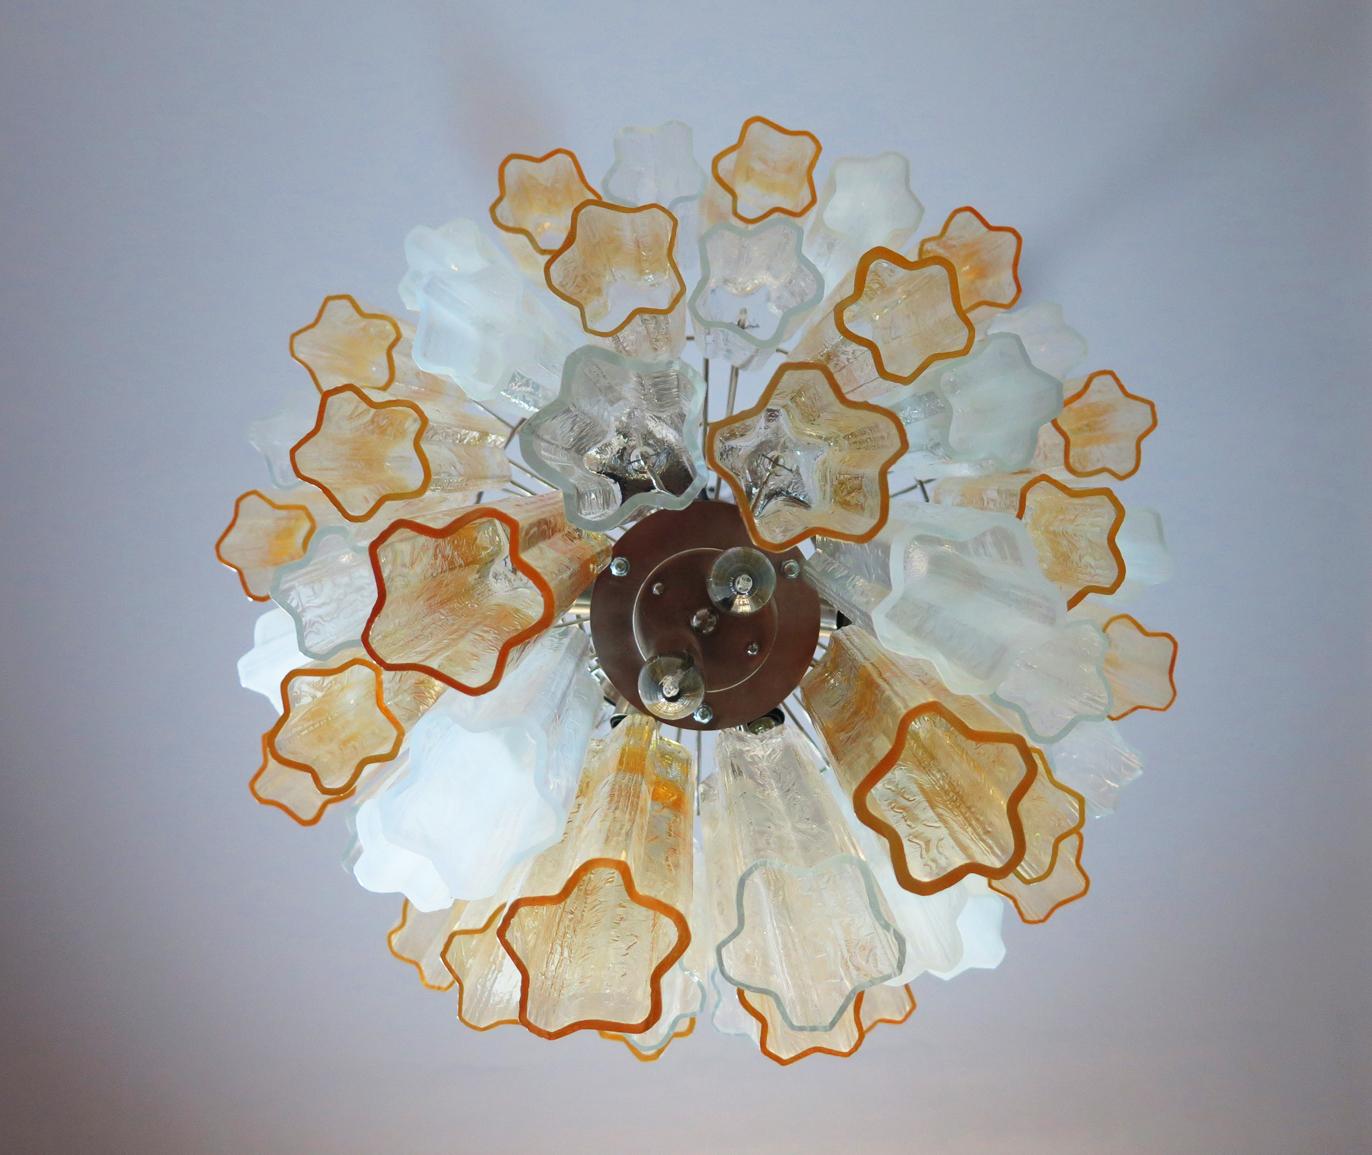 Mid-Century Modern Large Three-Tier Venini Murano Glass Tube Chandelier, Amber Opal Silk and Trasp For Sale